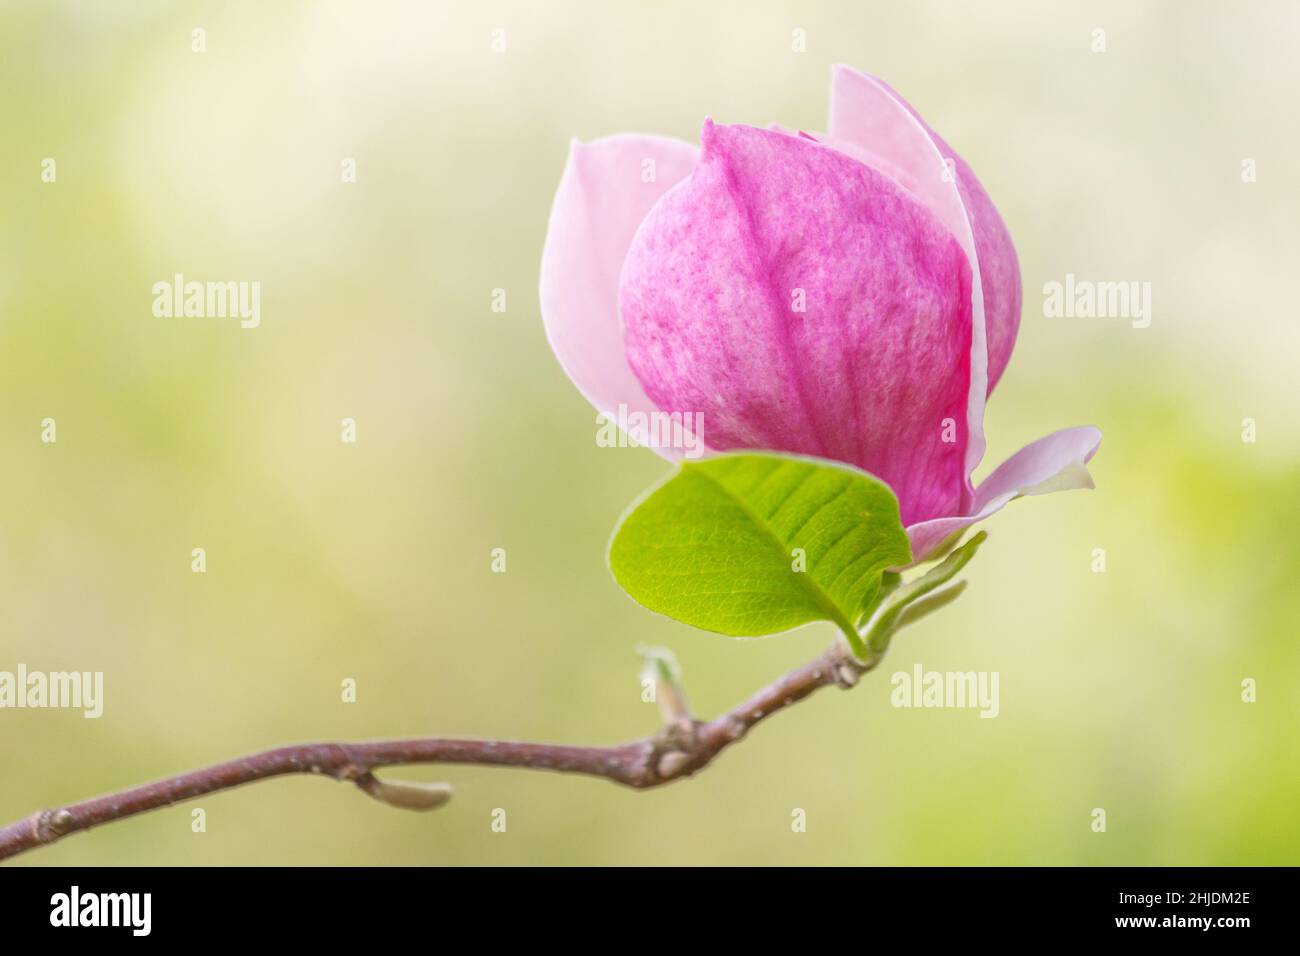 Magnolia soulangeana, saucer magnolia tree, flower in close-up view on a blurred background. Stock Photo